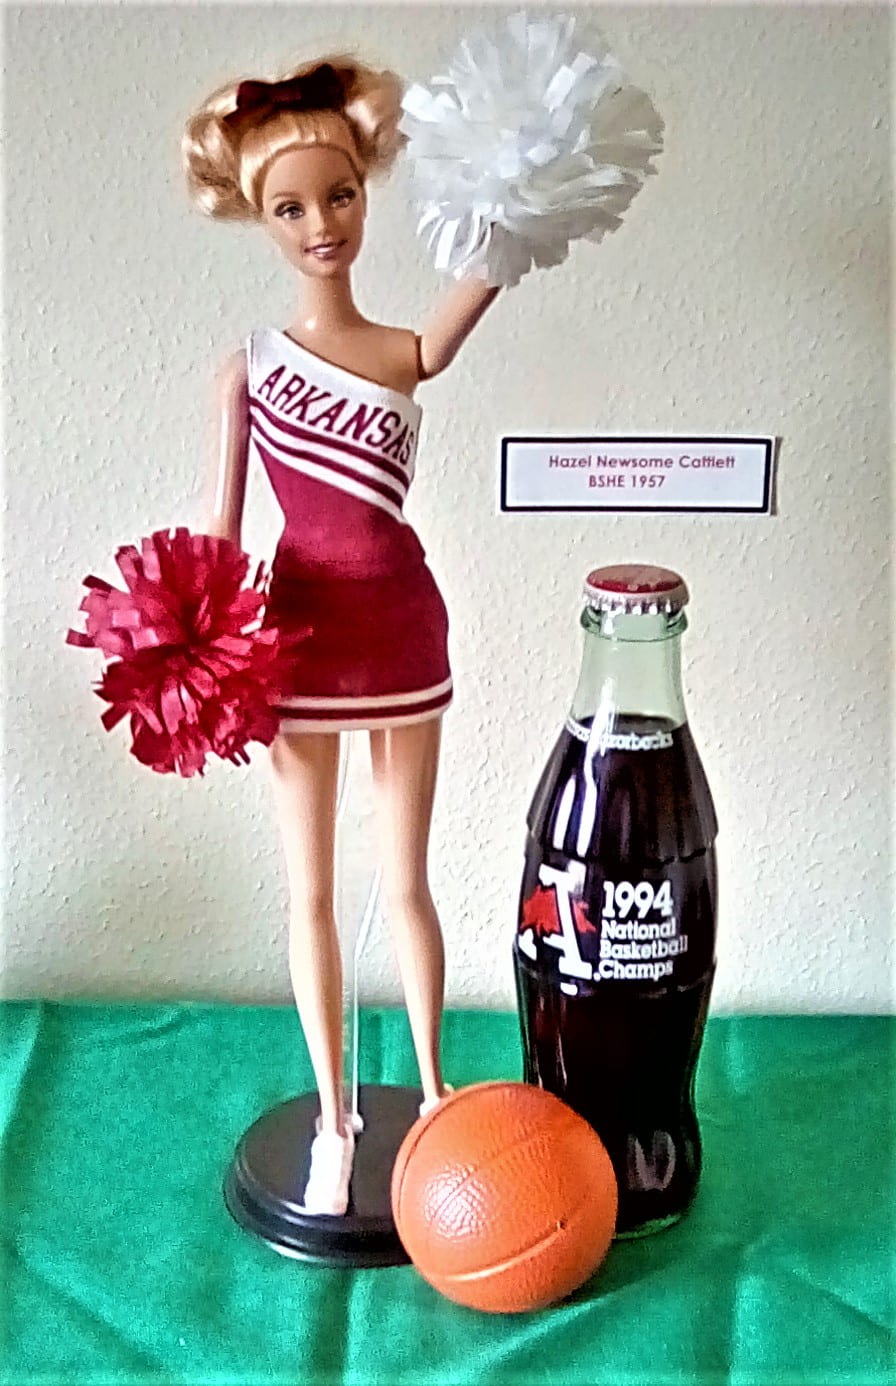 A cheerleader Barbie with one red and one white pom-pom in her hands. She wears a red and white outfit that says "Arkansas" on it. There is a small 1994 National Basketball Champs Coca-Cola bottle and small plastic basketball next to the doll.